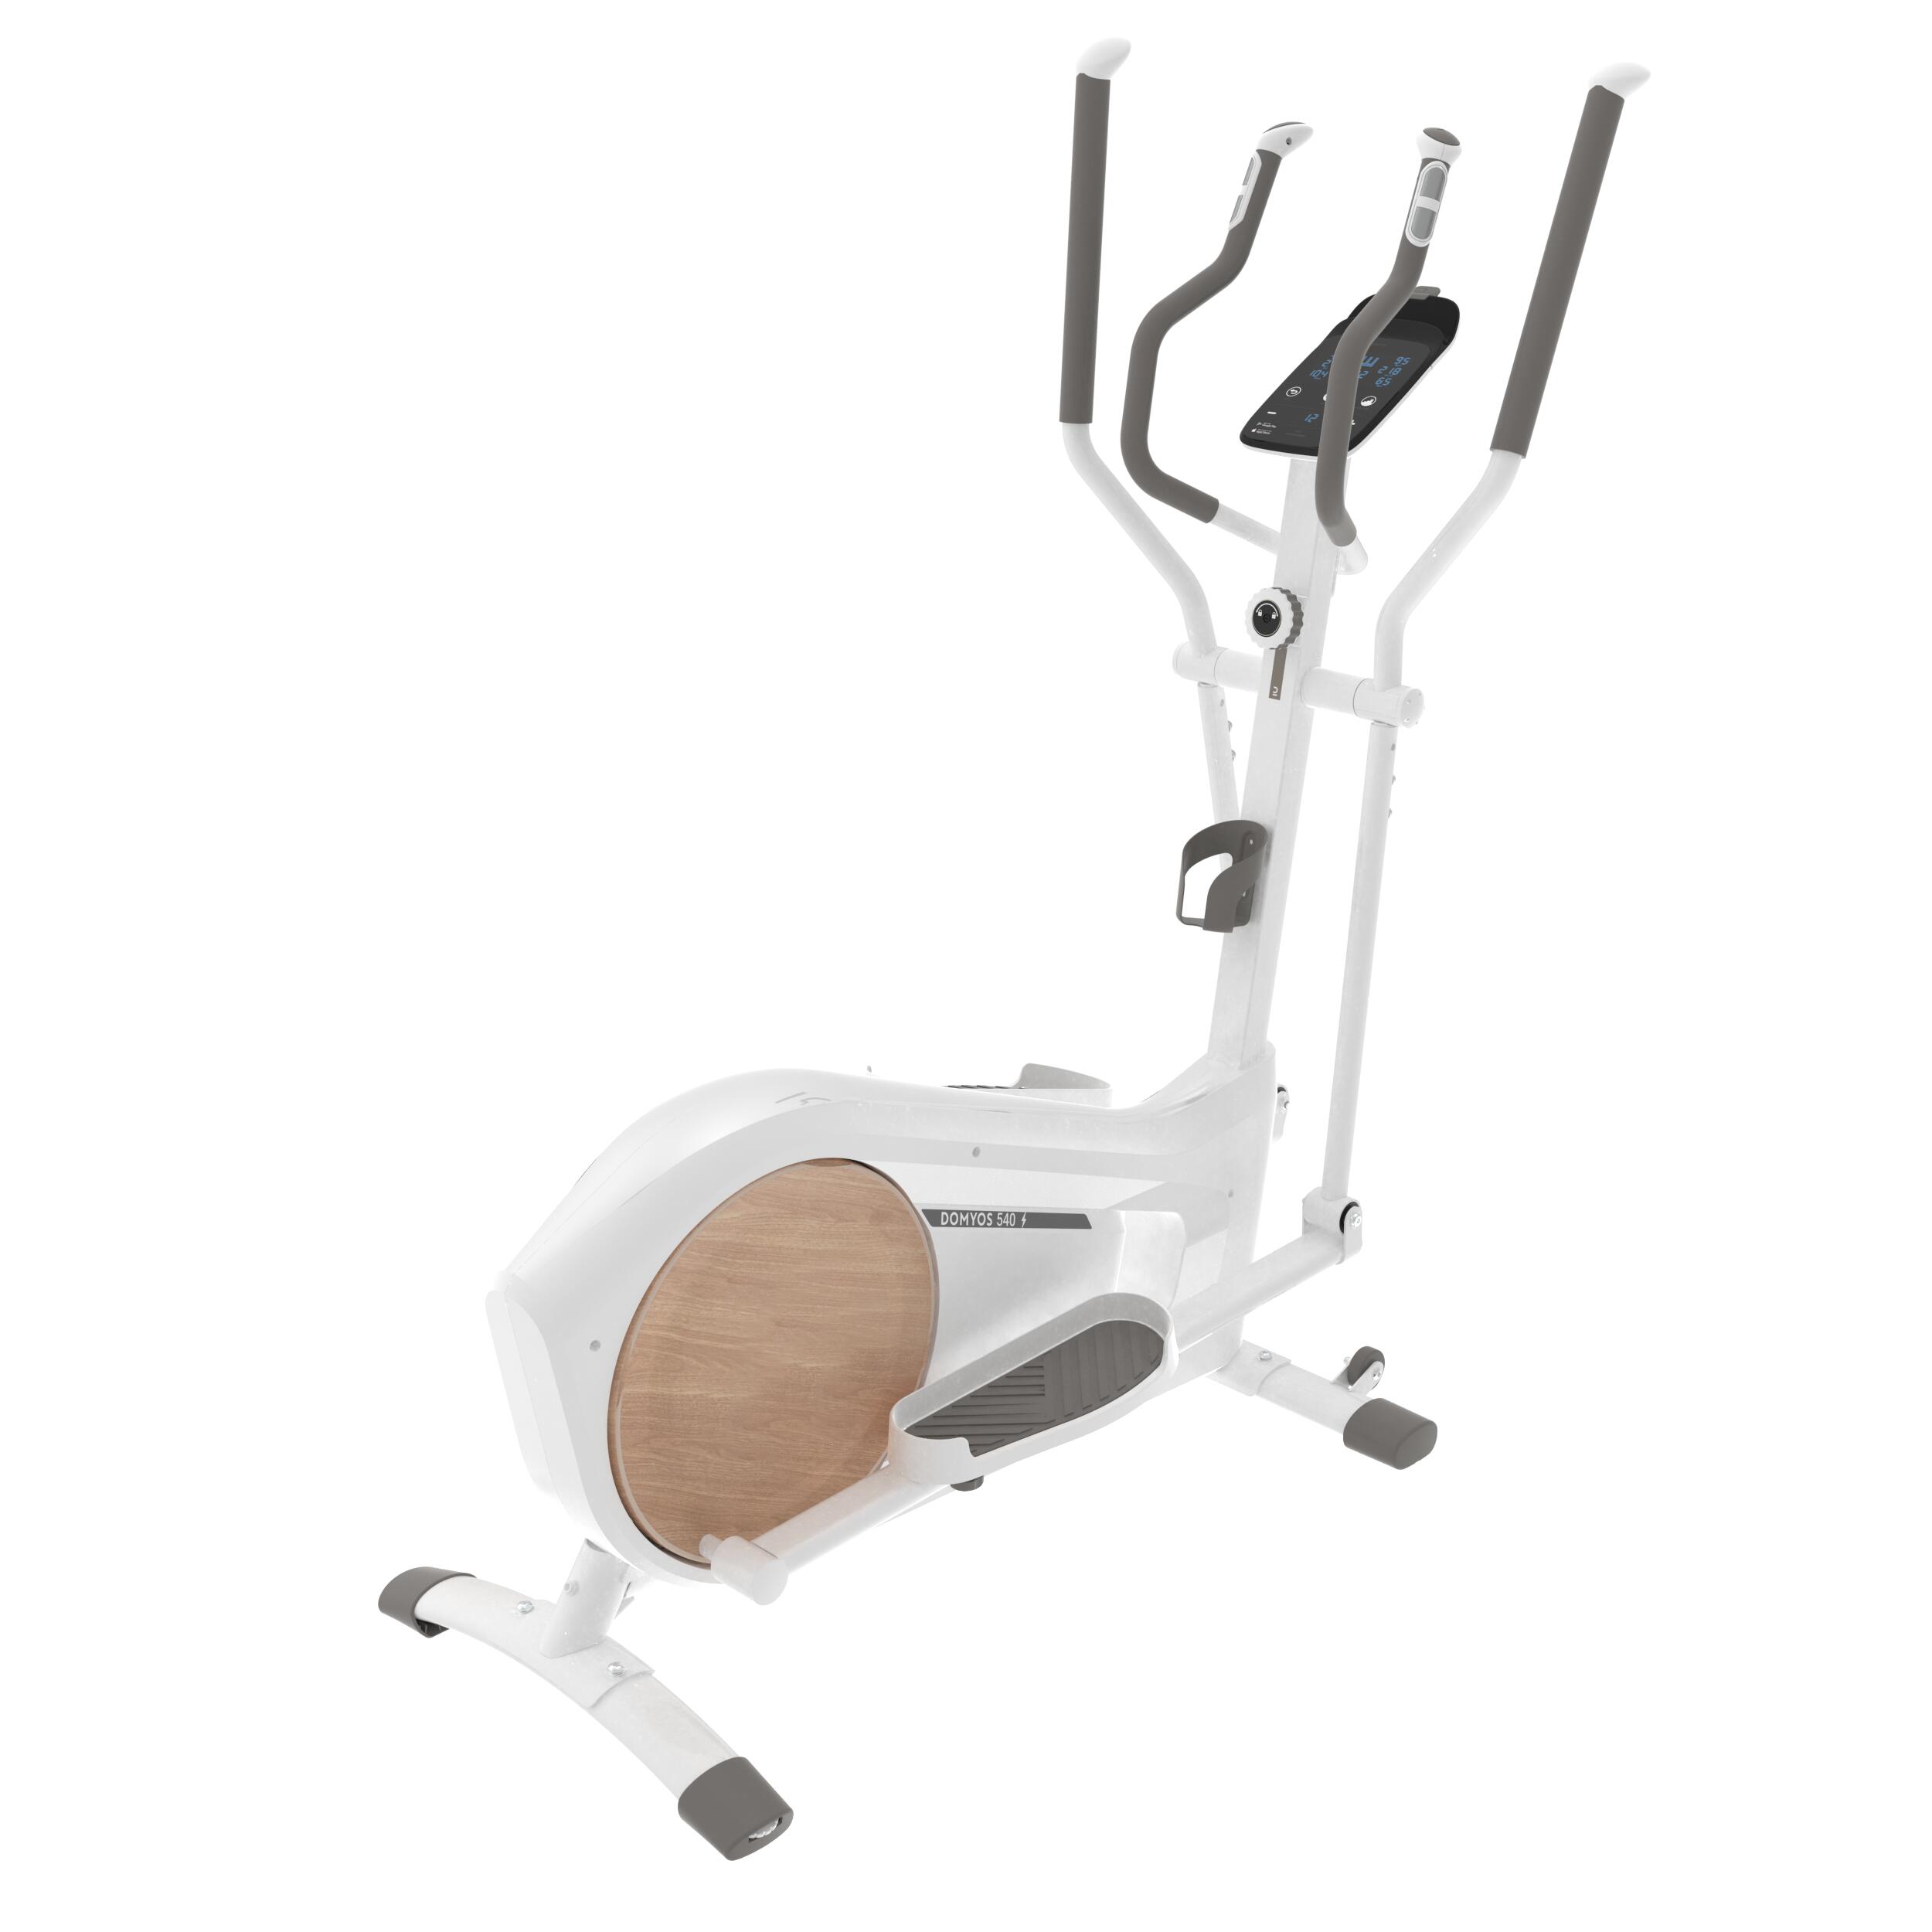 DOMYOS Self-Powered and Connected, E-Connected & Kinomap Compatible Cross Trainer EL540